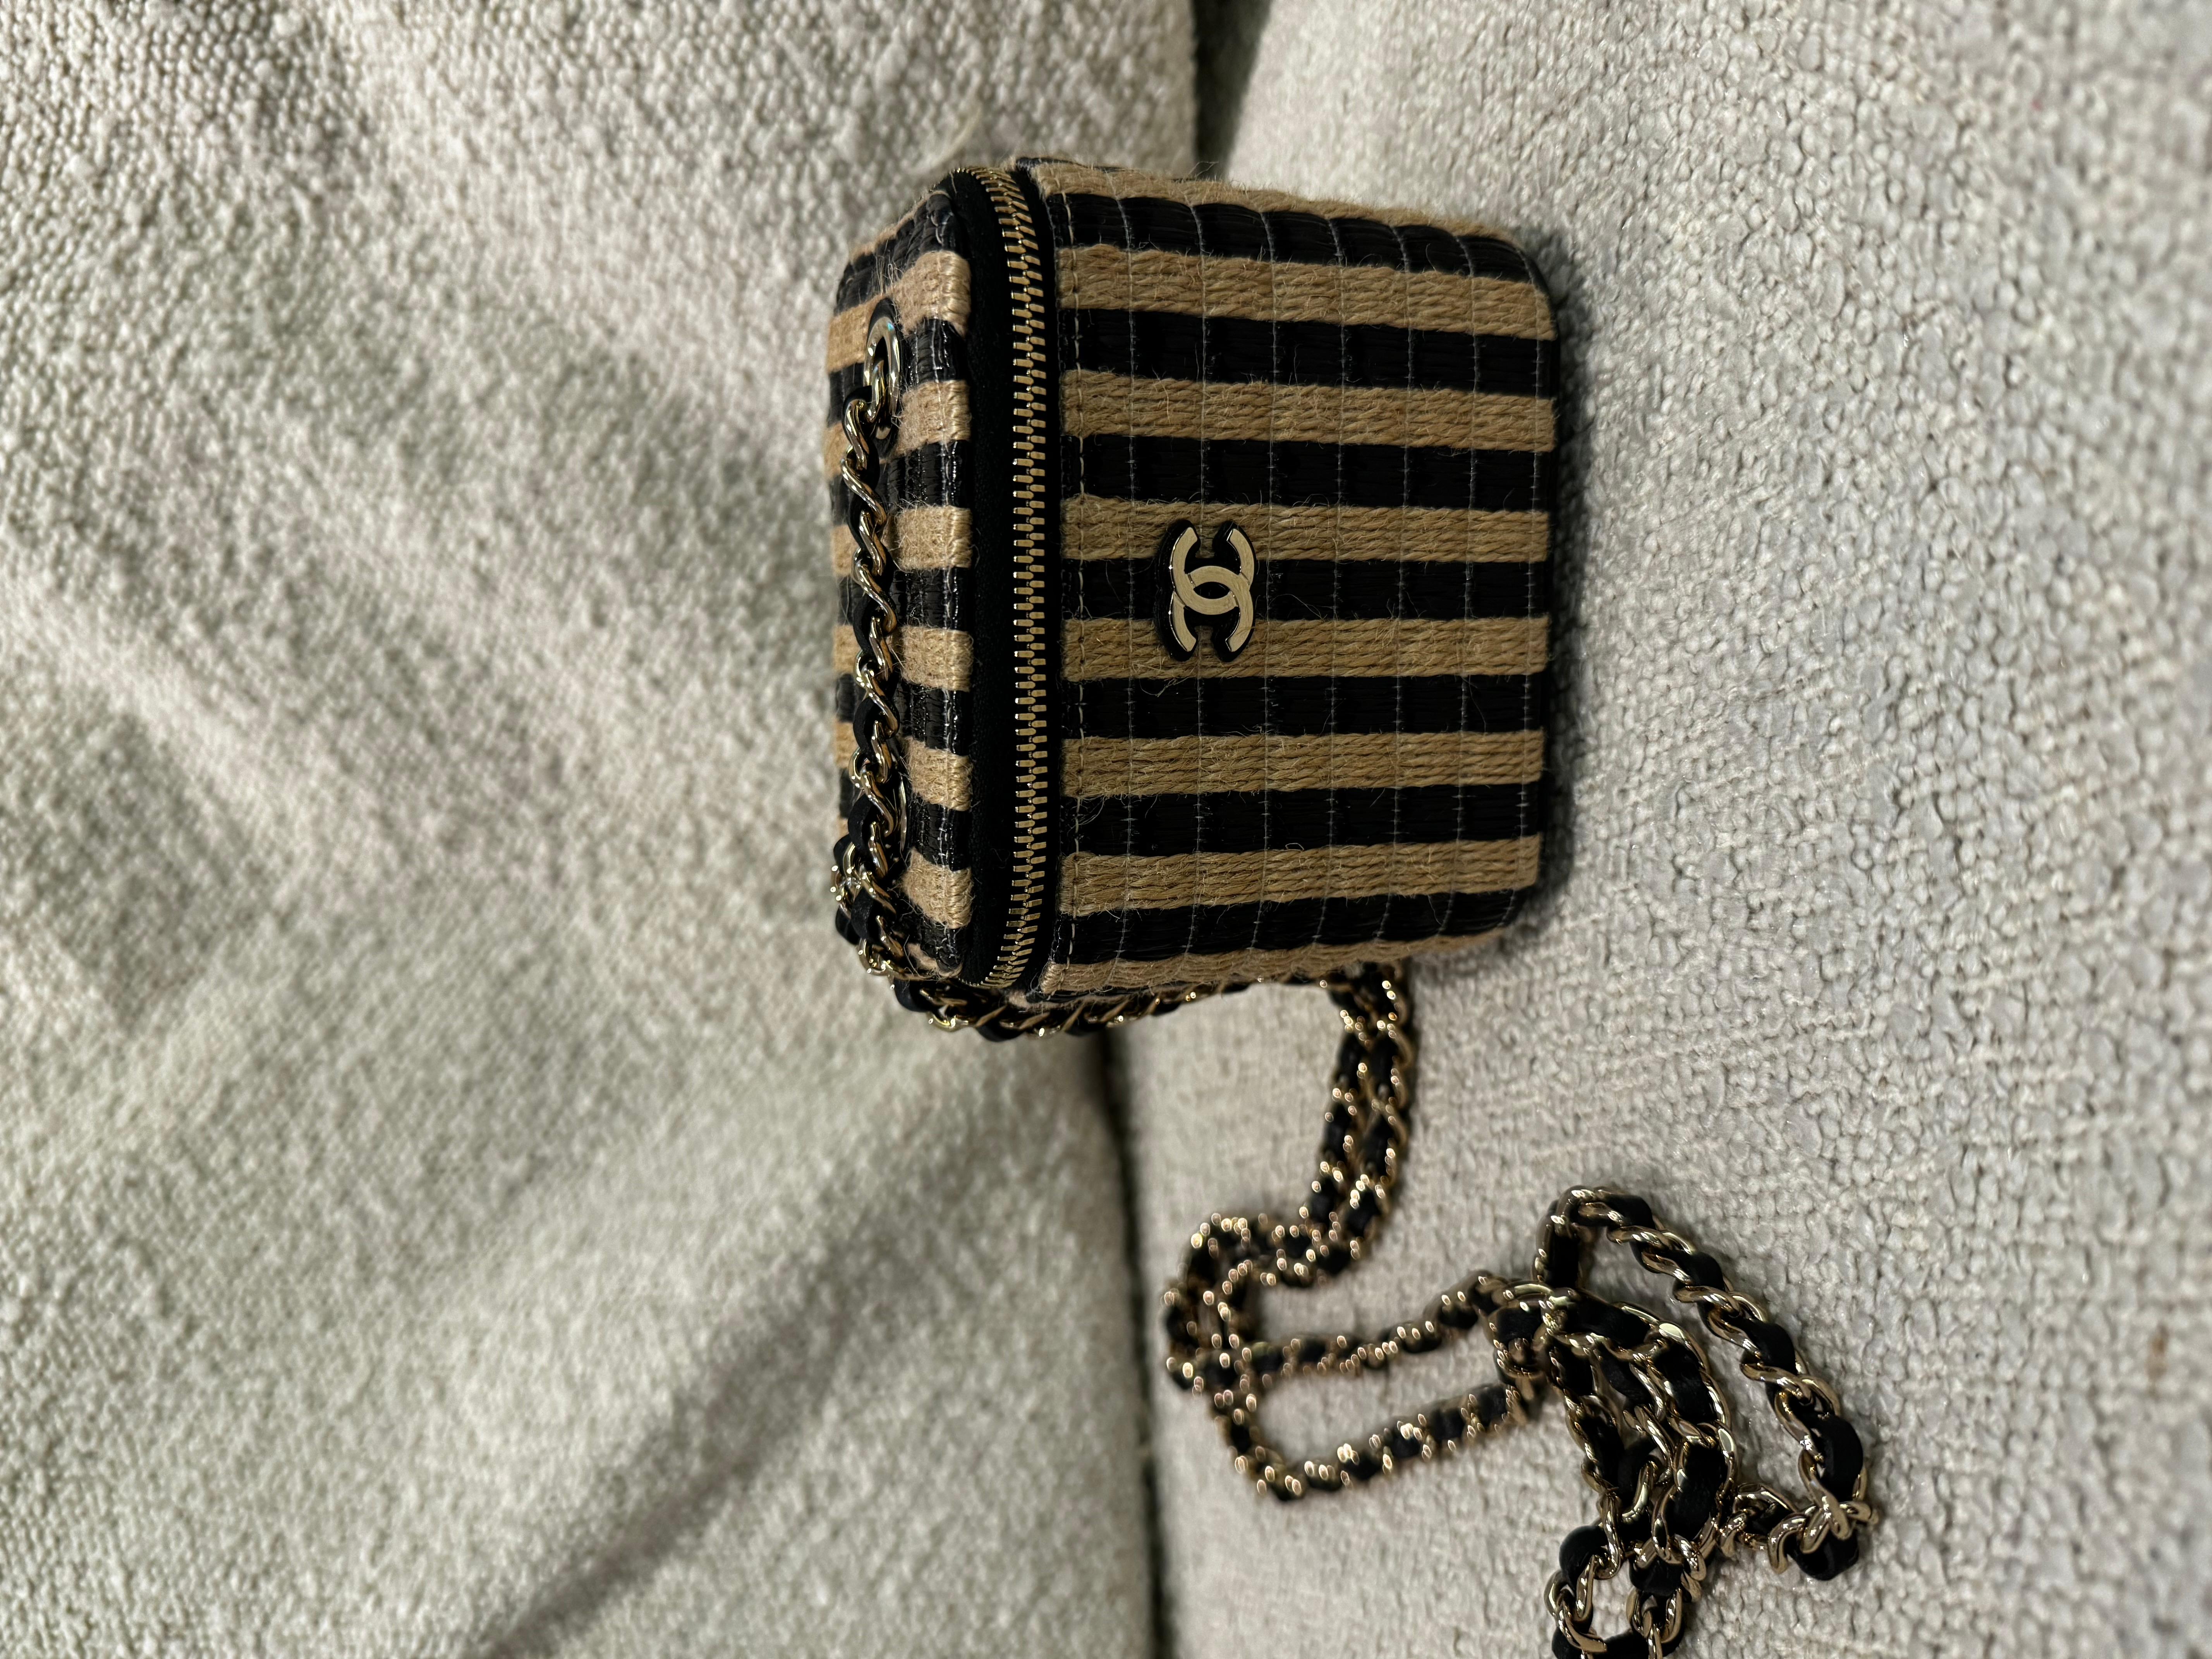 A Chanel Tan and Black Raffia Mini Vanity Case Spring/Summer 2021 (includes serial sticker, authenticity card, receipt and dust bag). 
One of the most famous vanity case bags, sold out immediately when released. 